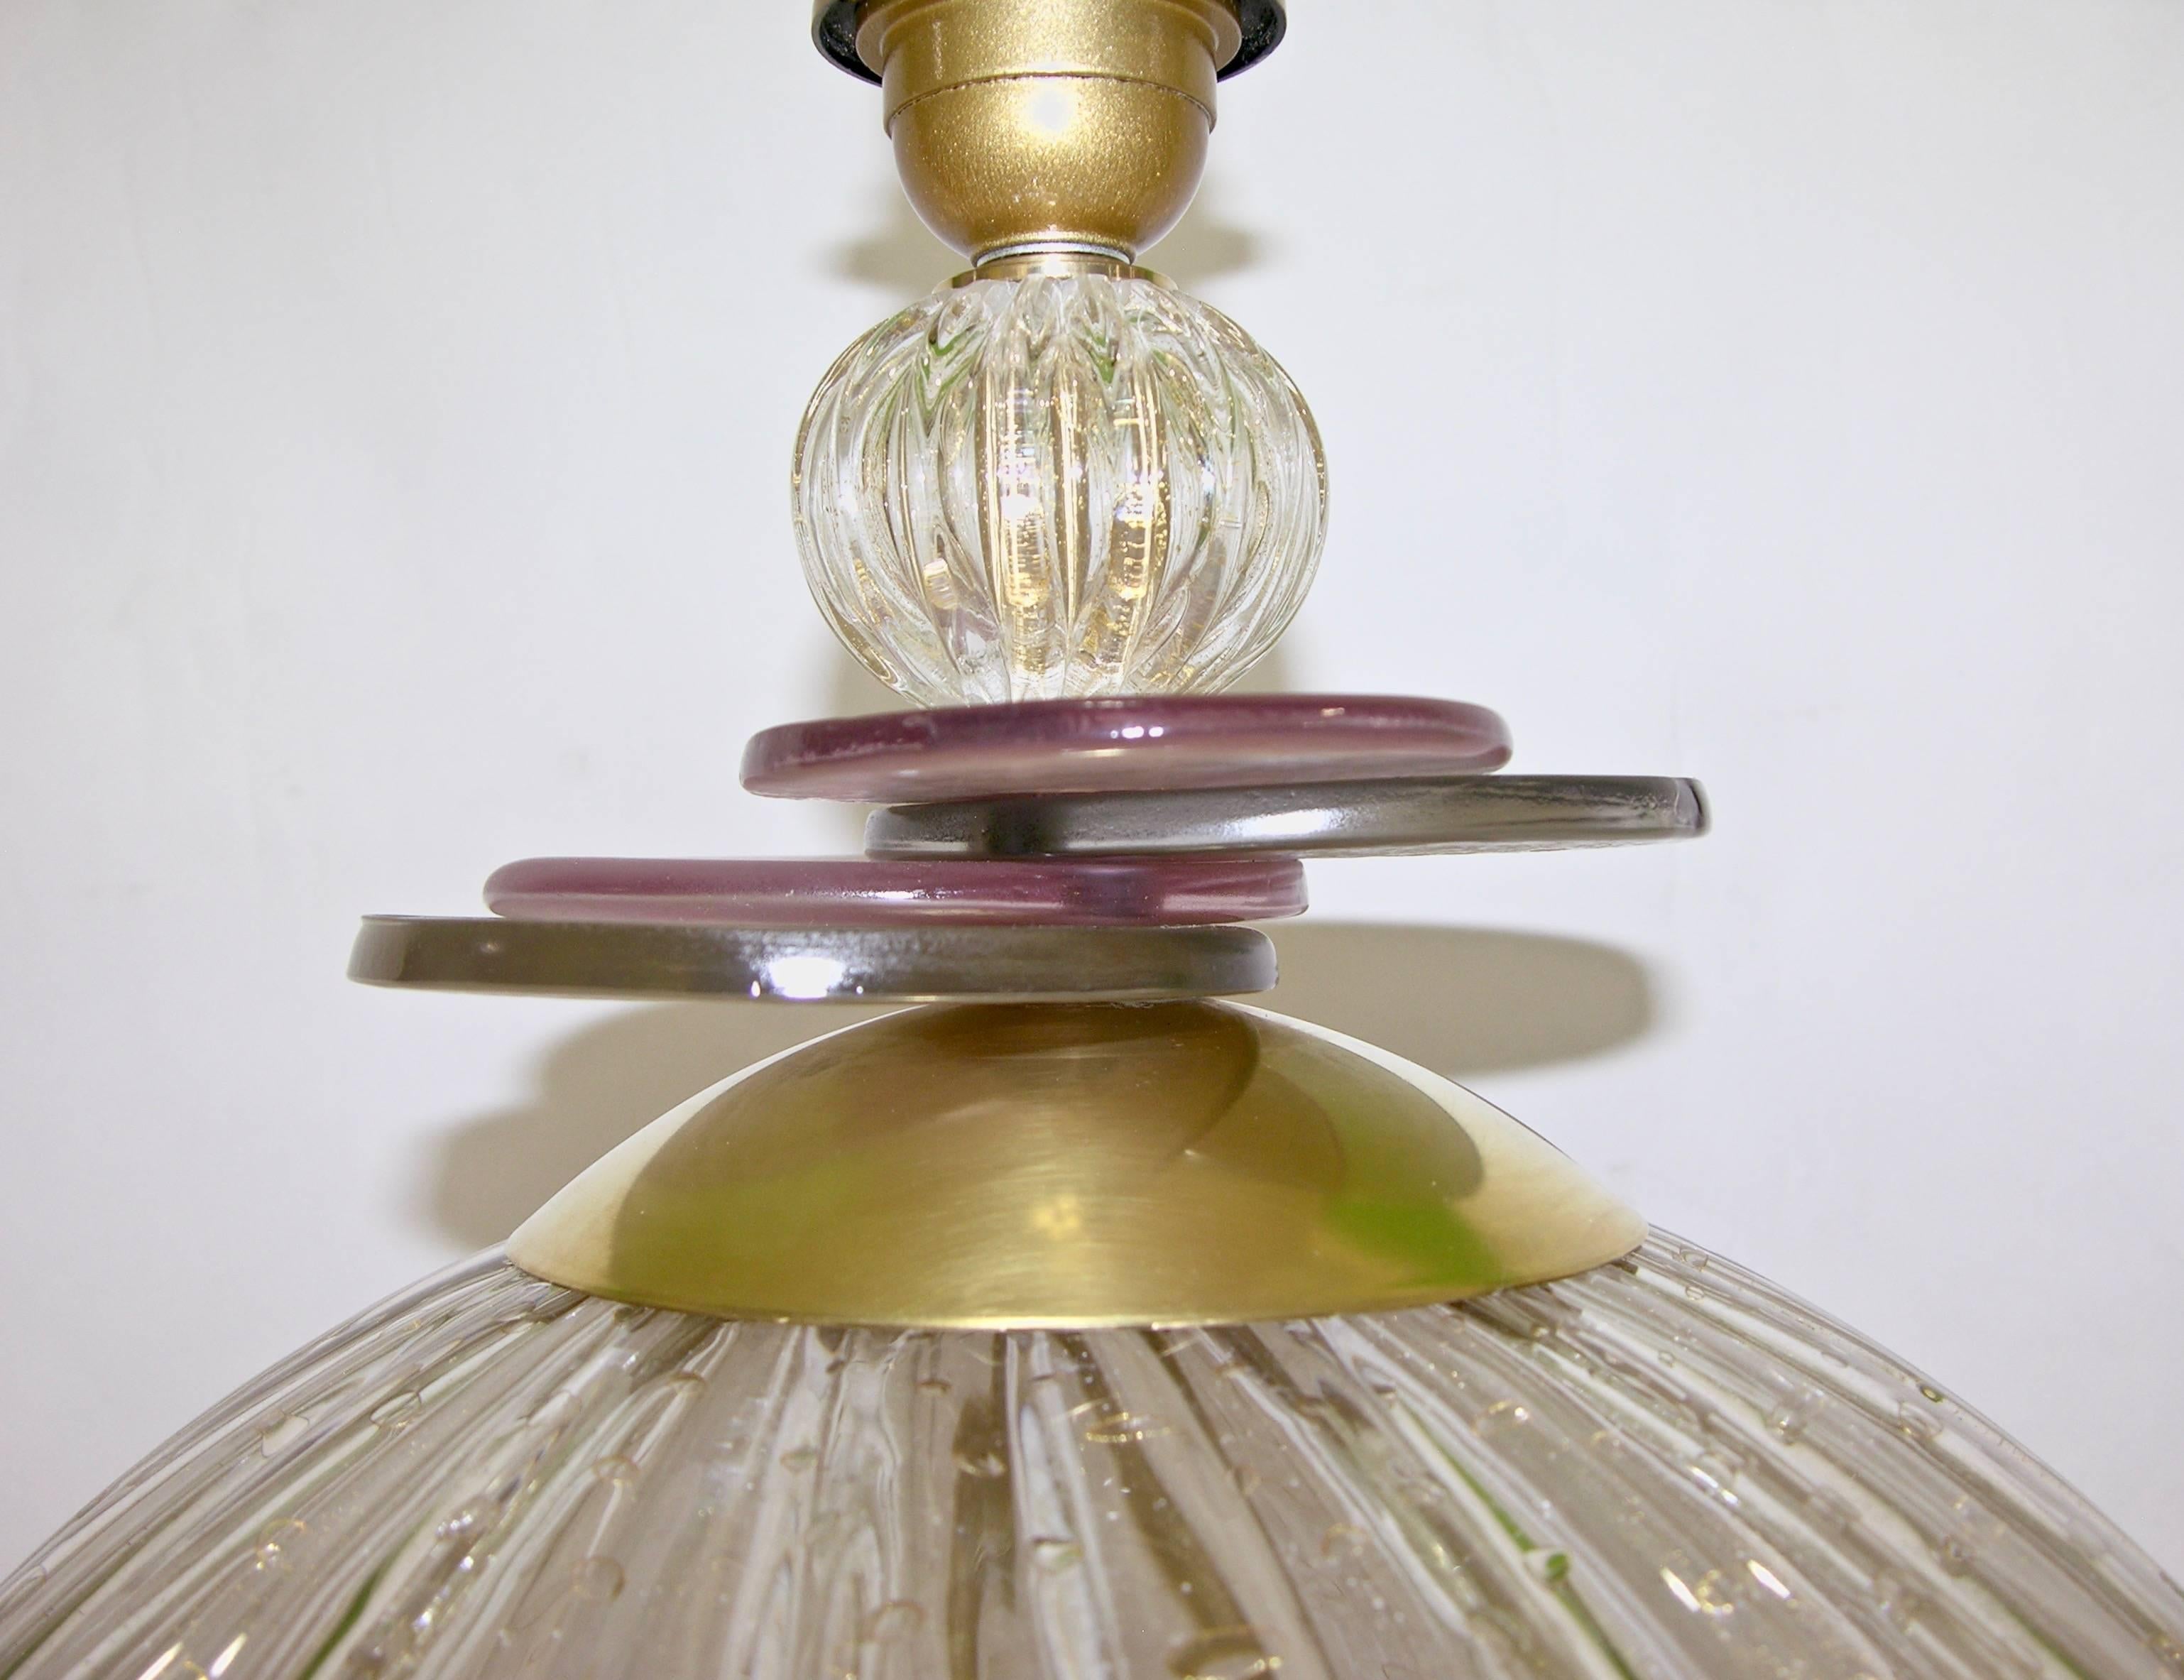 Organic Modern 1980s Italian Pair of Round Gold Murano Glass Lamps with Purple and Gray Accents